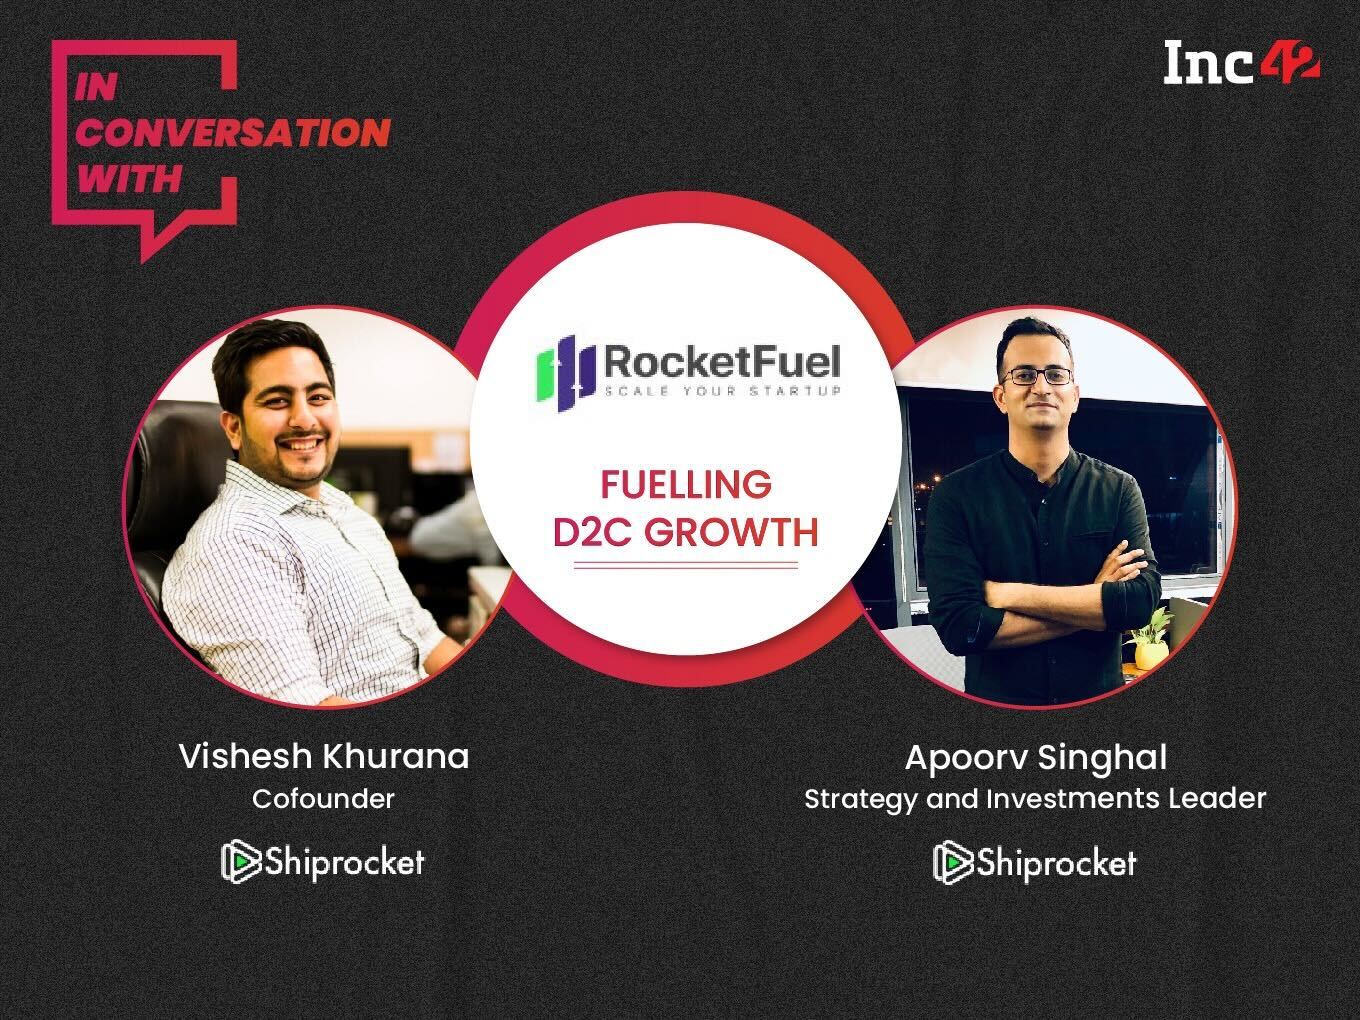 How Shiprocket Is Fuelling D2C Growth Through Its RocketFuel Accelerator Programme